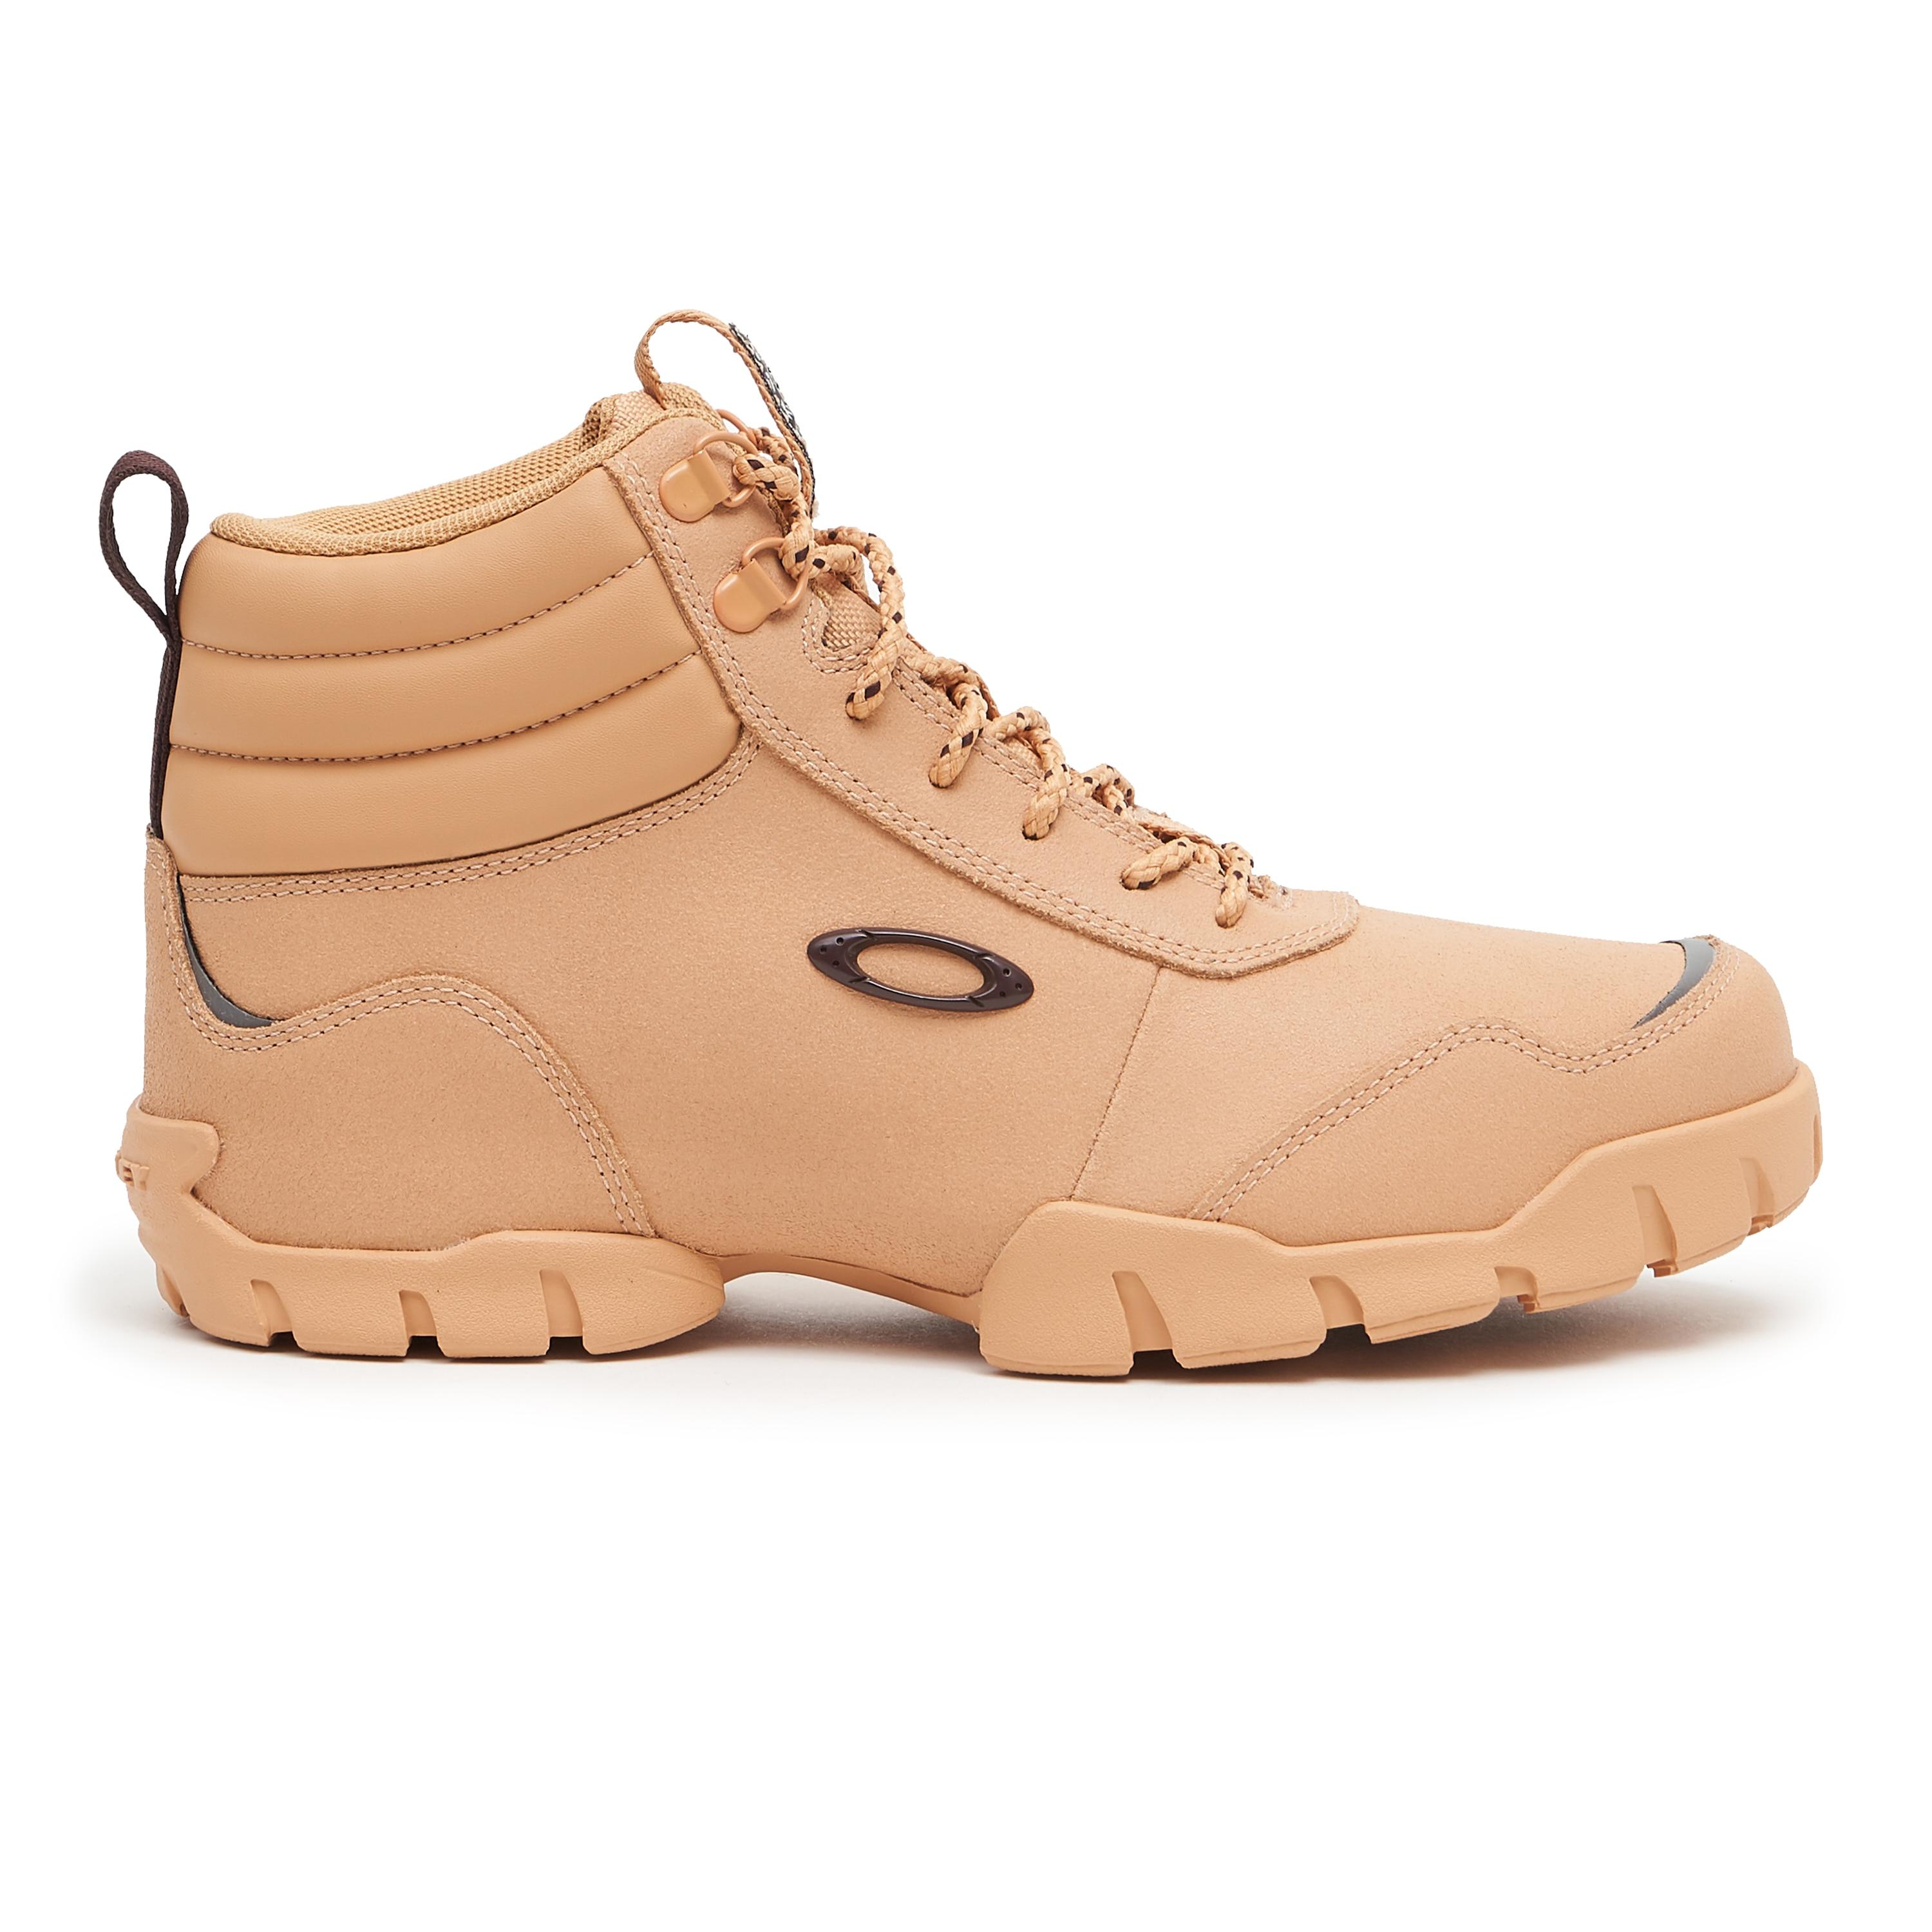 Oakley Outdoor Boots in Natural for Men - Lyst